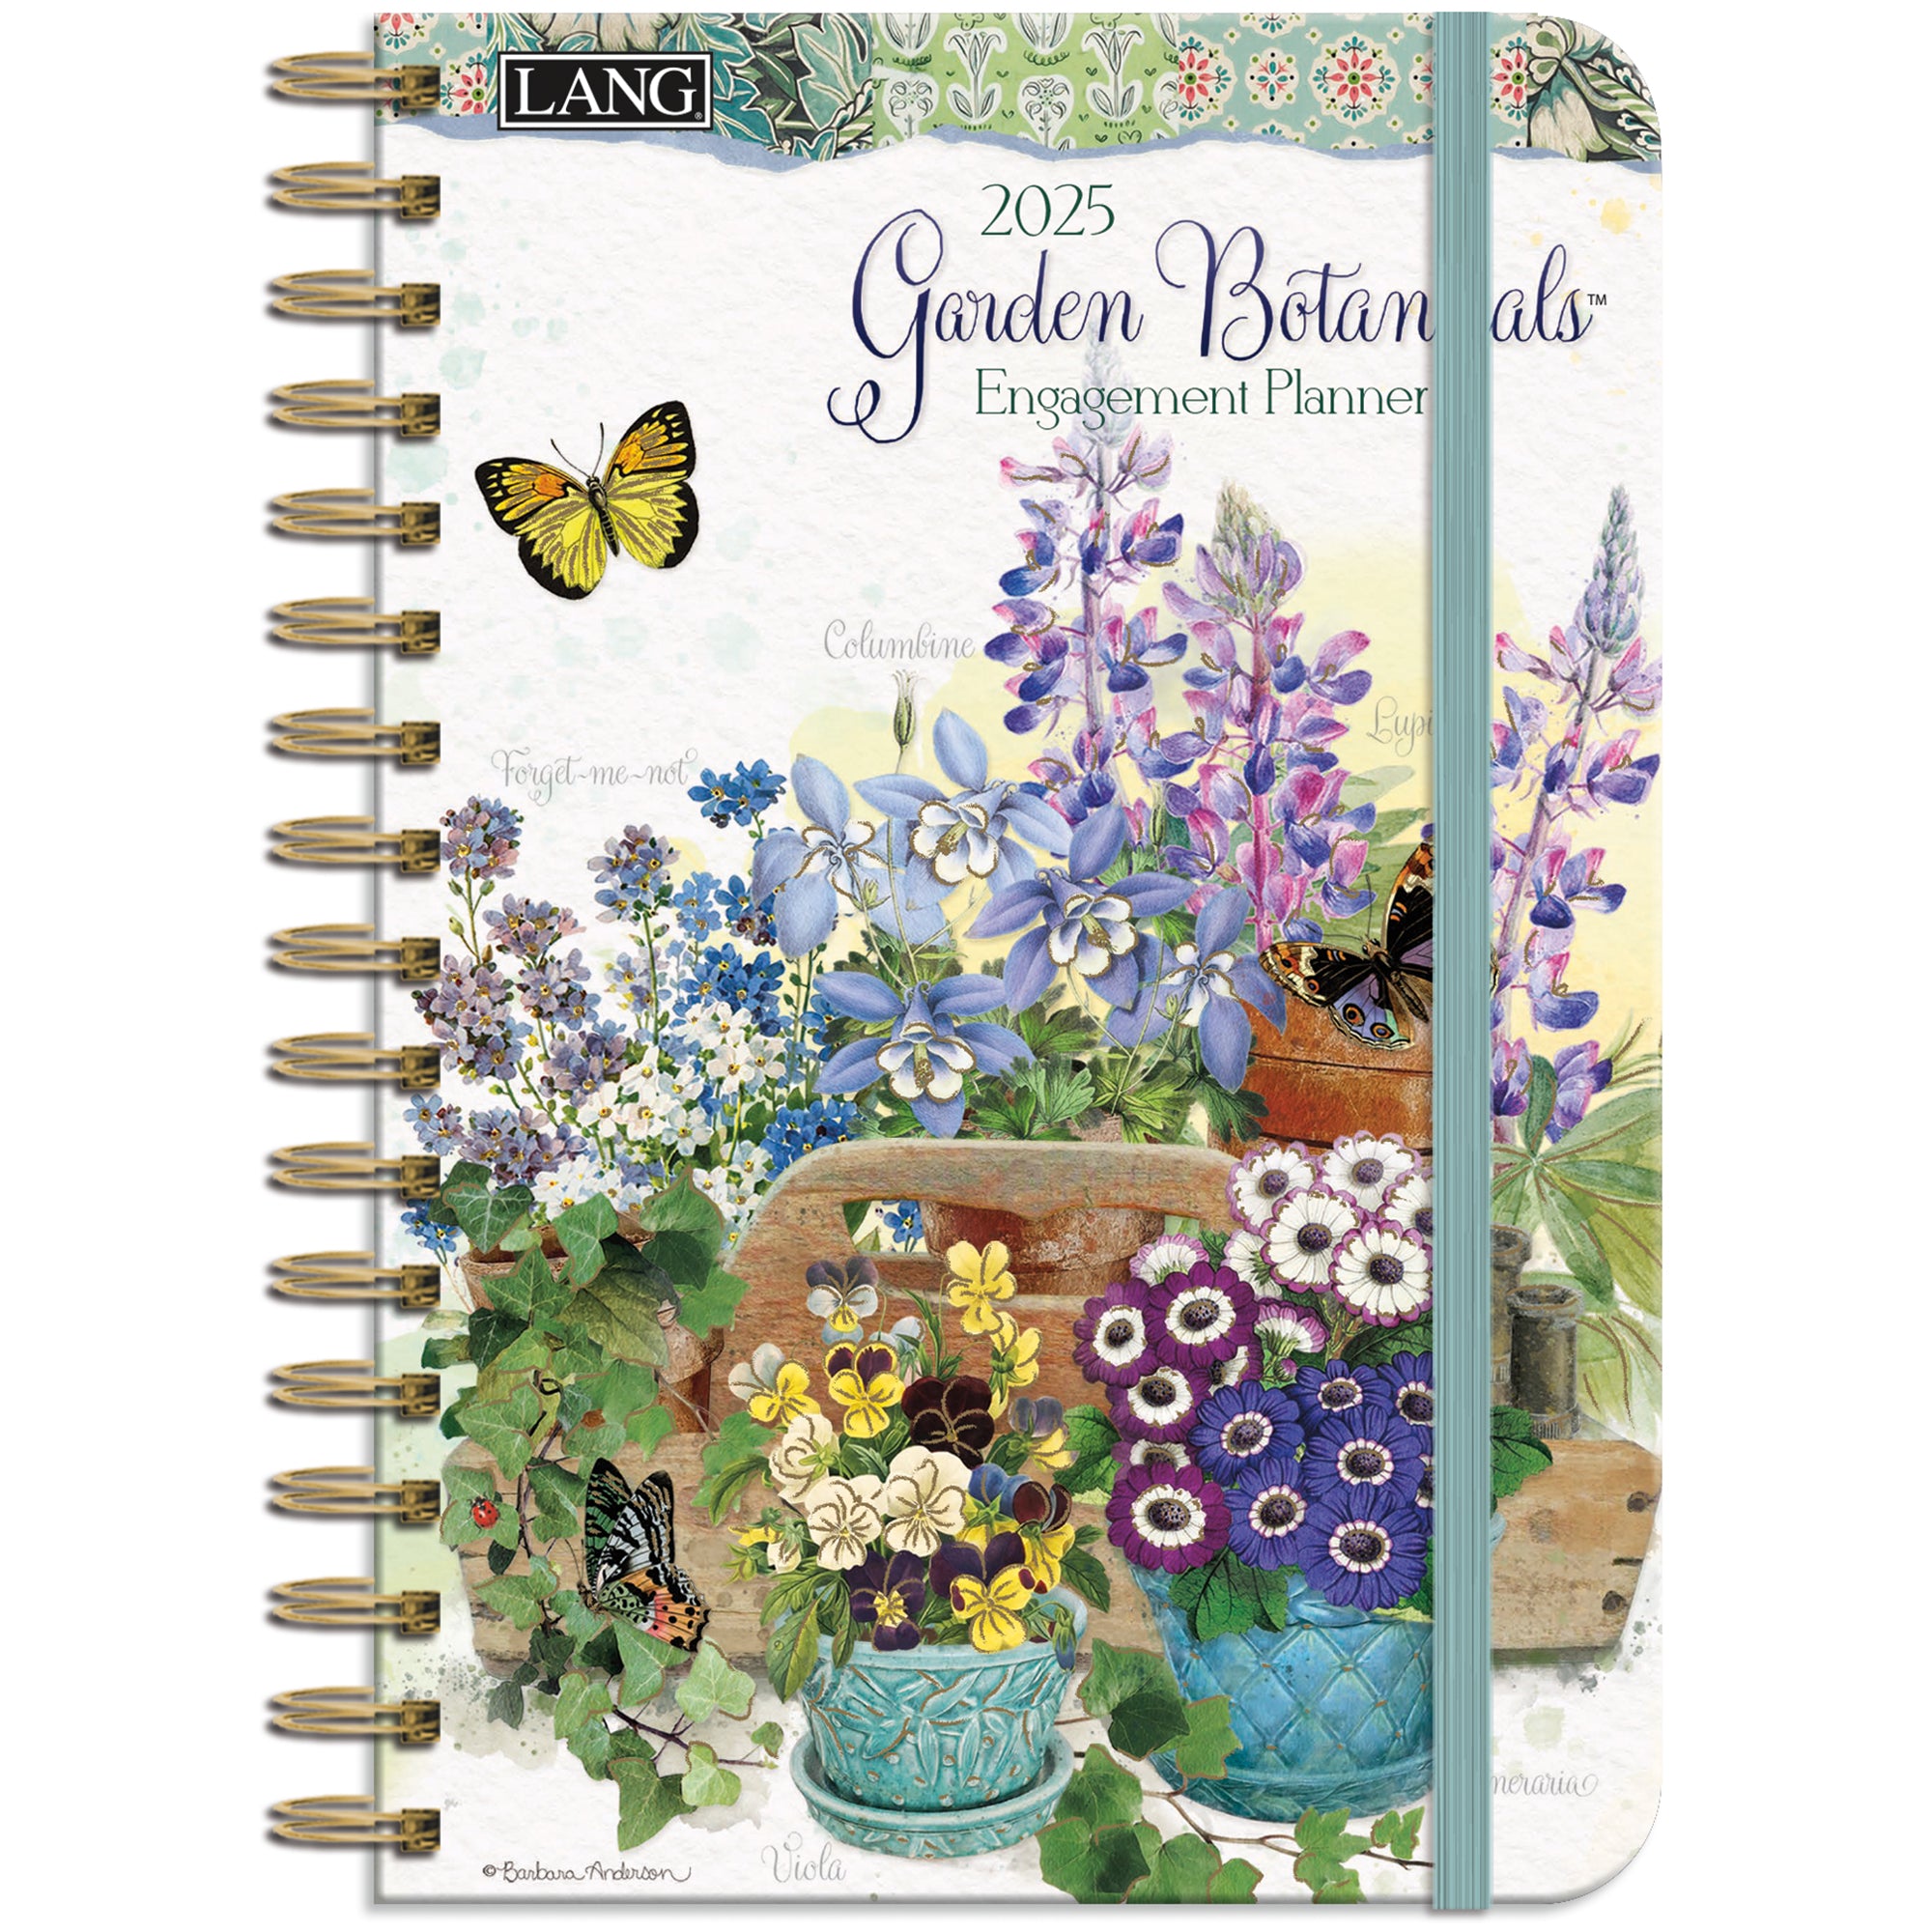 2025 Garden Botanicals - LANG Monthly Engagement Diary/Planner